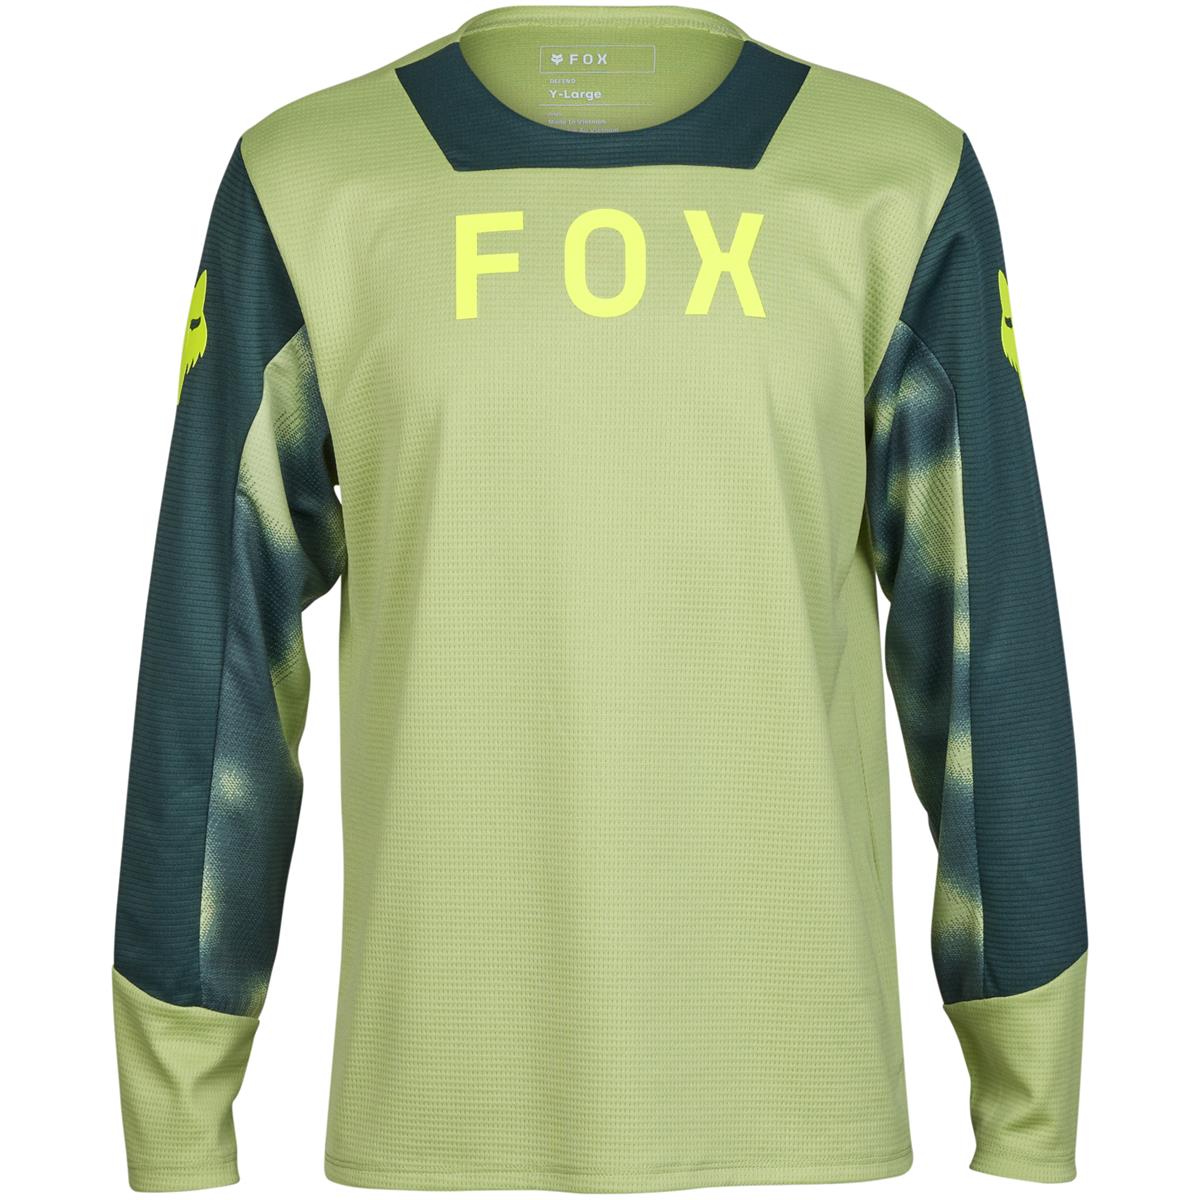 Fox Kids MTB Jersey Long Sleeve Defend Taunt - Pale Green